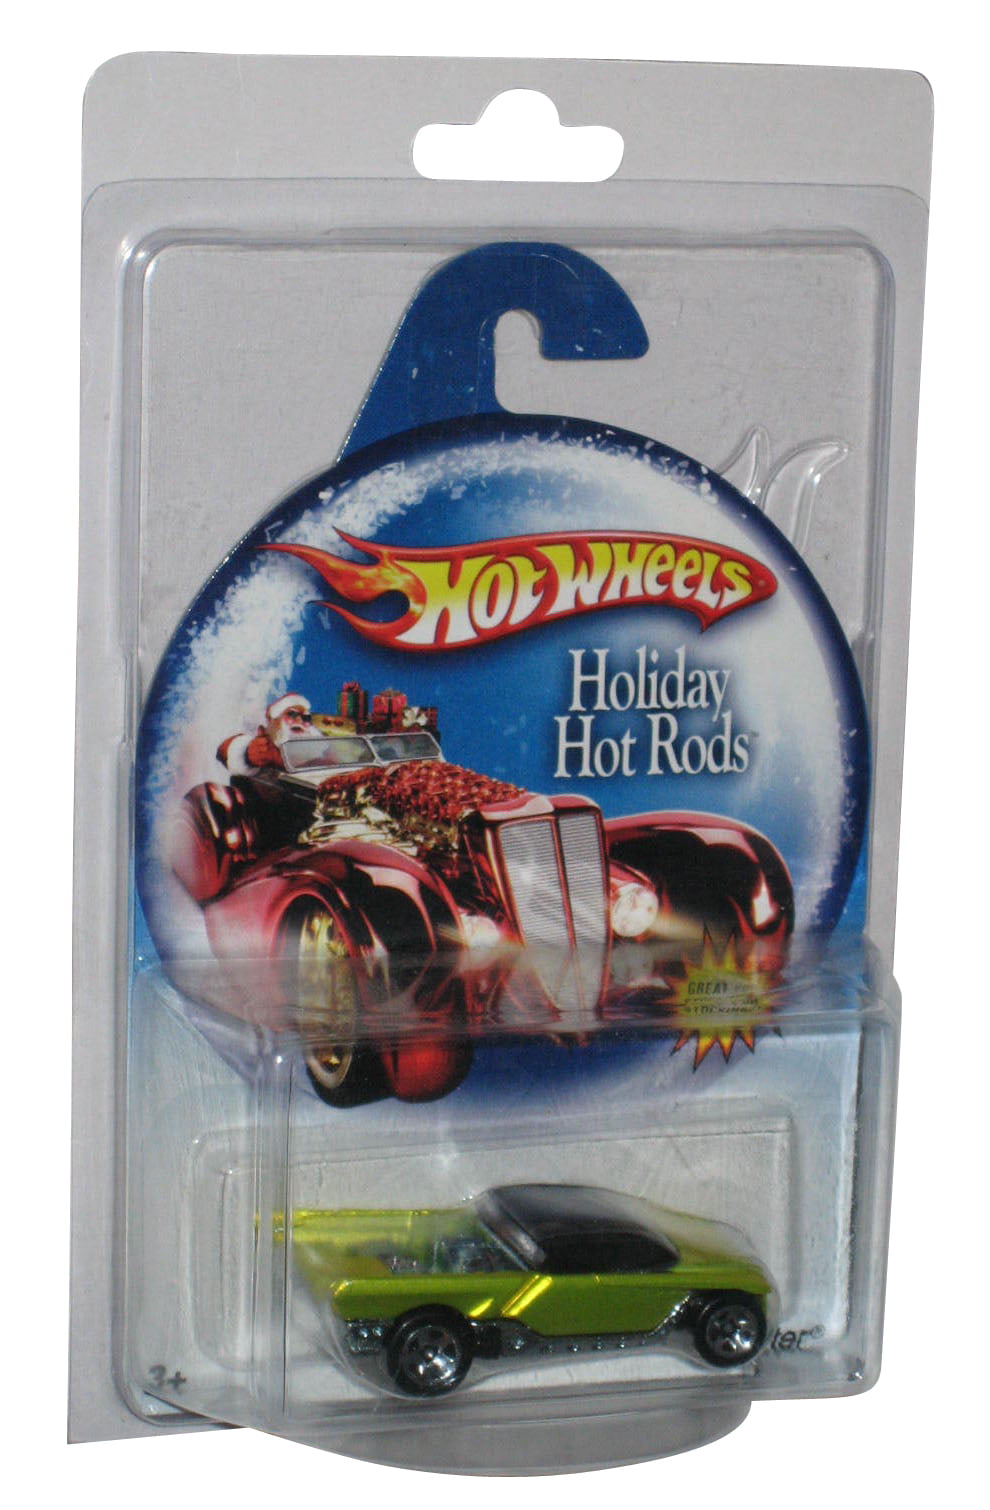 Details about   Hot Wheels 2019 Happy New Year Holiday Hot Rods CARBONATOR Wal-Mart Exclusive 